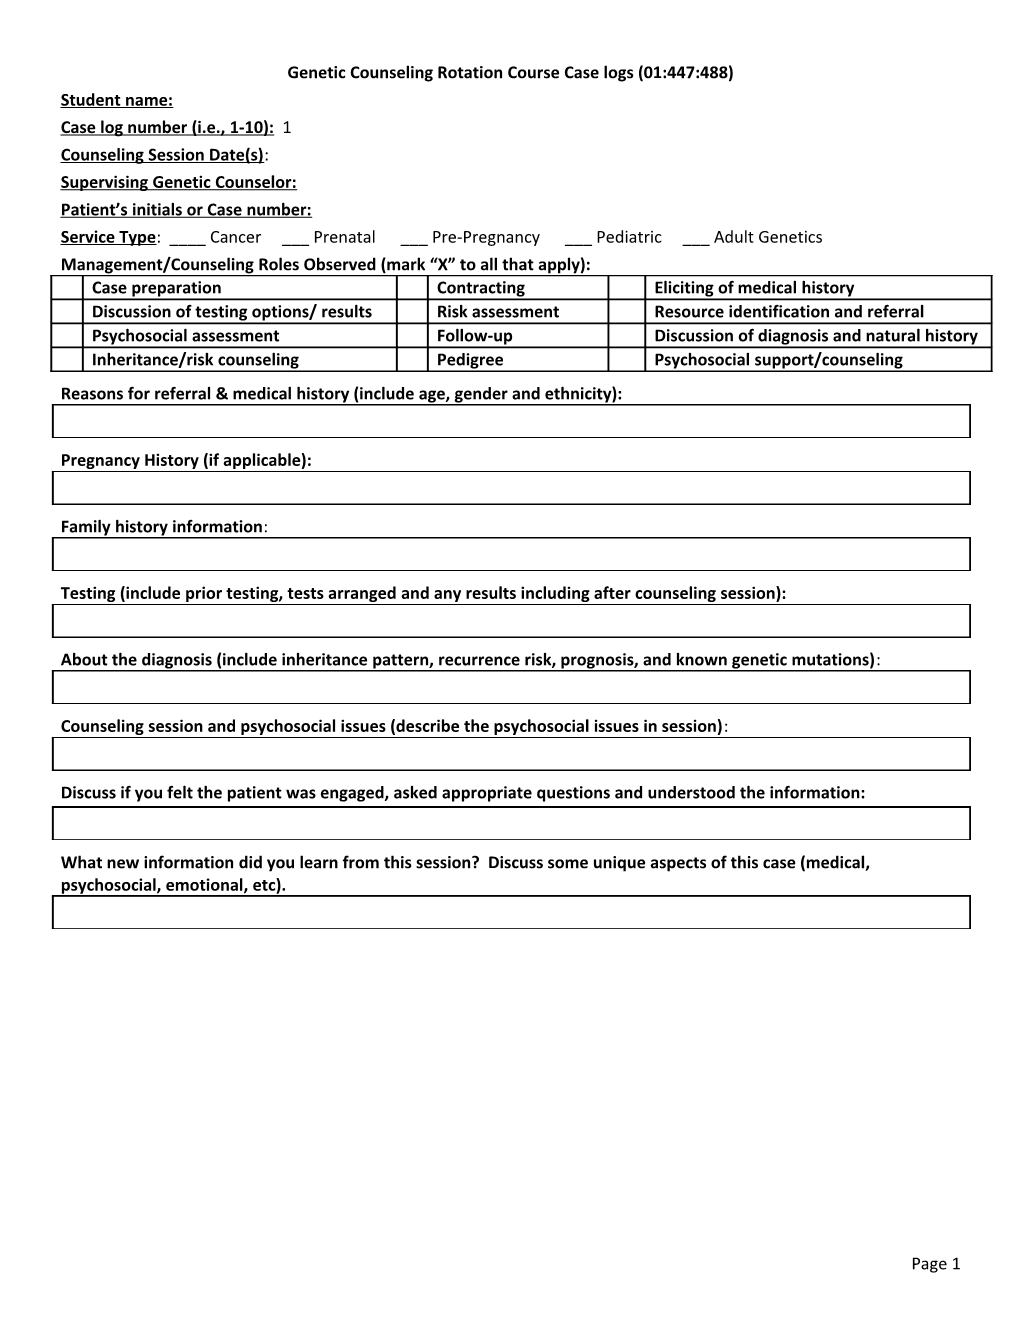 Genetic Counseling Rotation Course Case Logs (01:447:488)